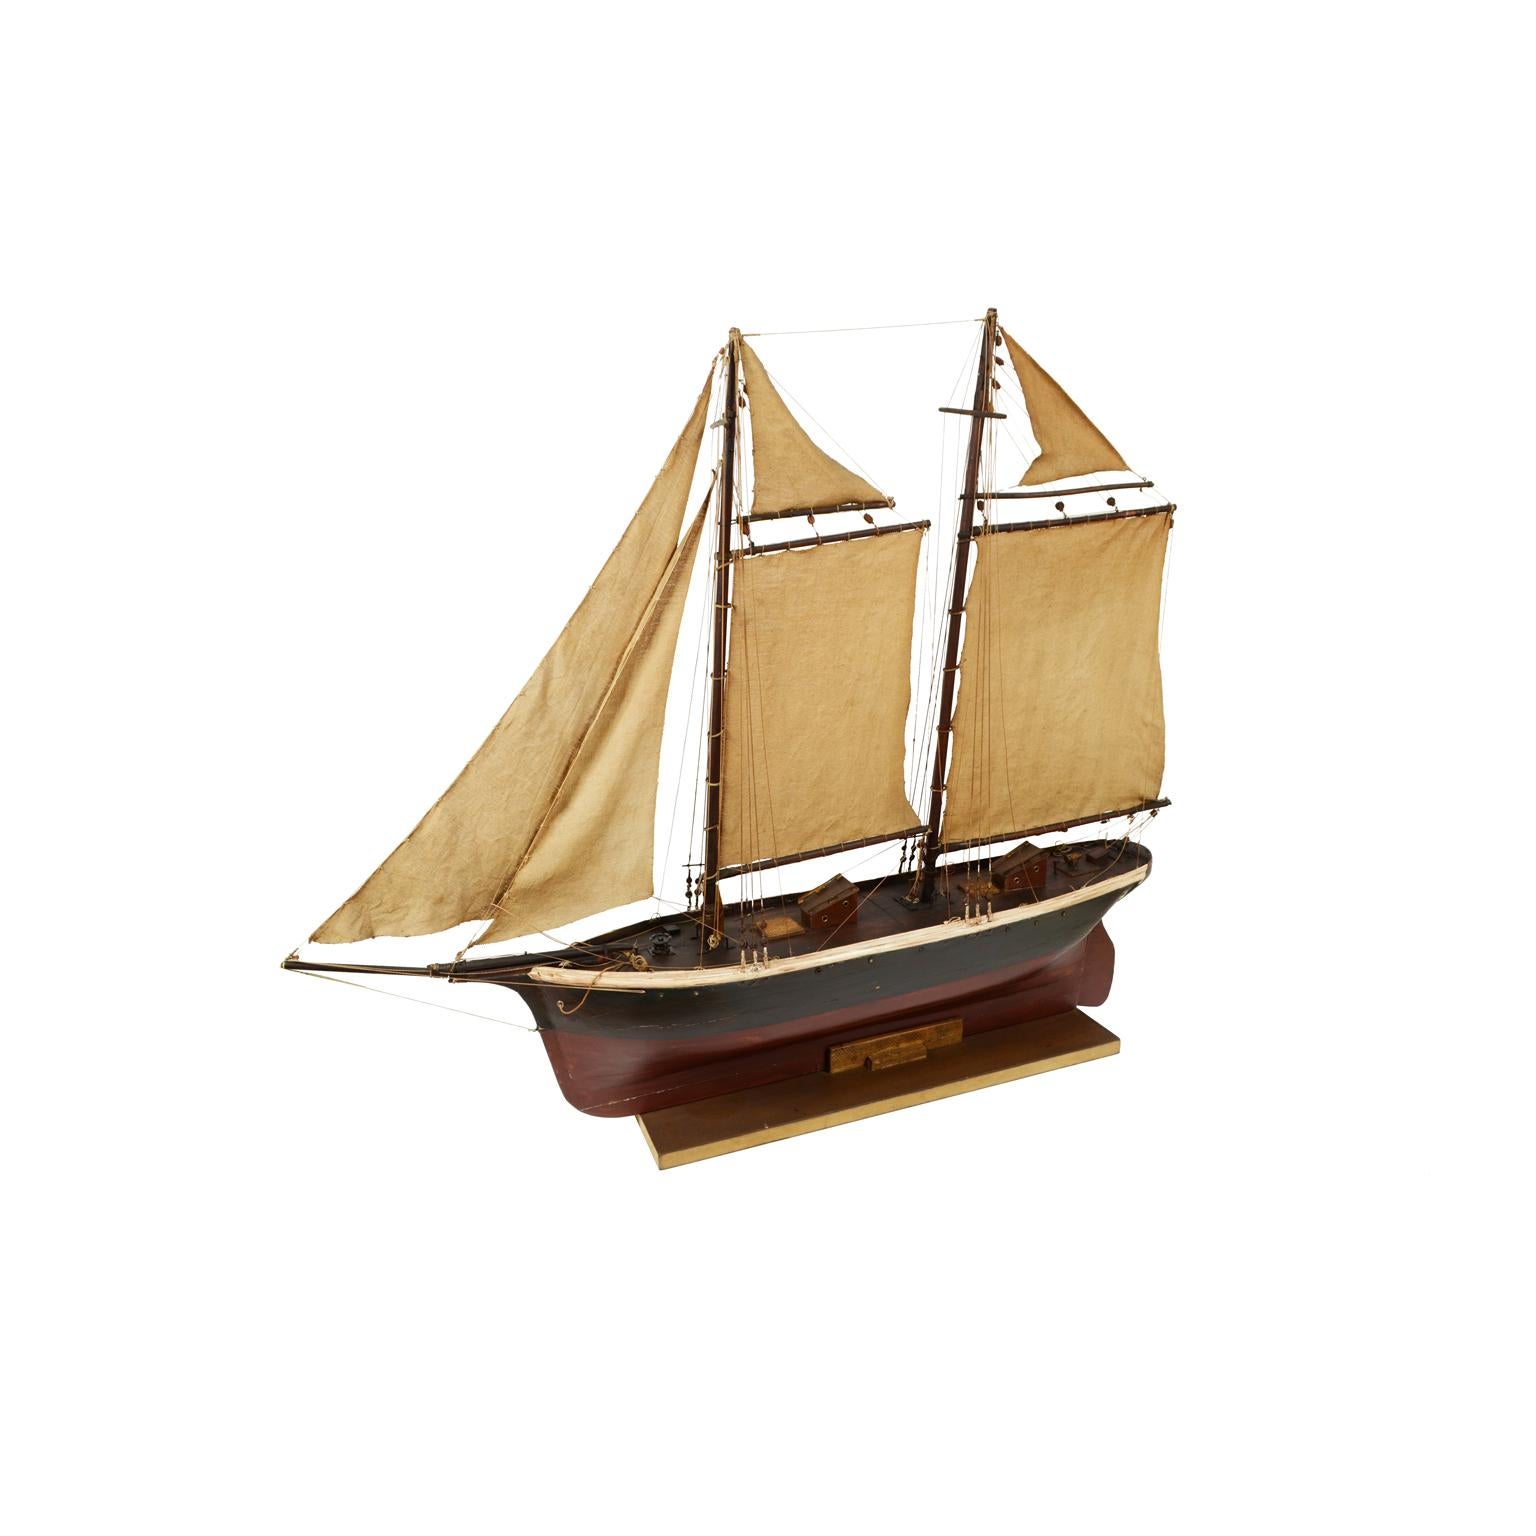 Wooden model of a schooner dated back to the early 1900s. Measures: Cm 129 x 105 - inches 50.78 x 41.33.
The schooner was a sailing vessel with two masts, agile and fast, which was used for secondary military tasks, exploration and transportation in